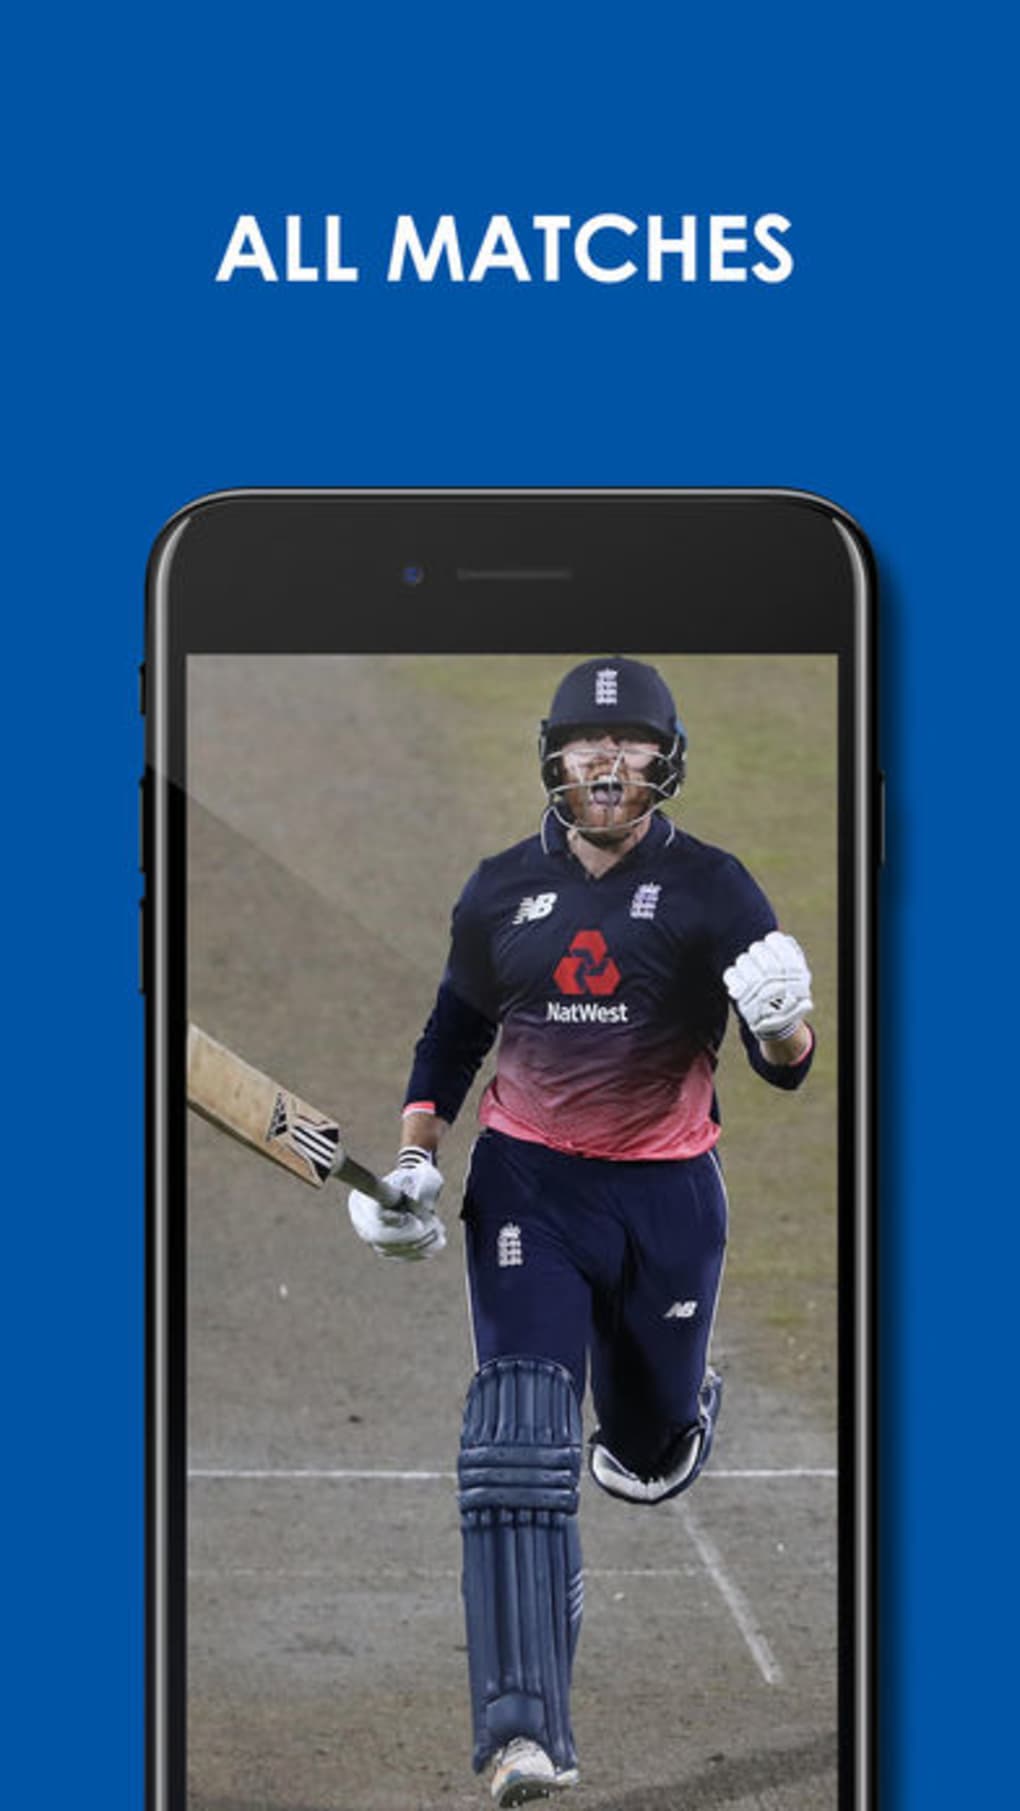 watch live cricket match on iphone